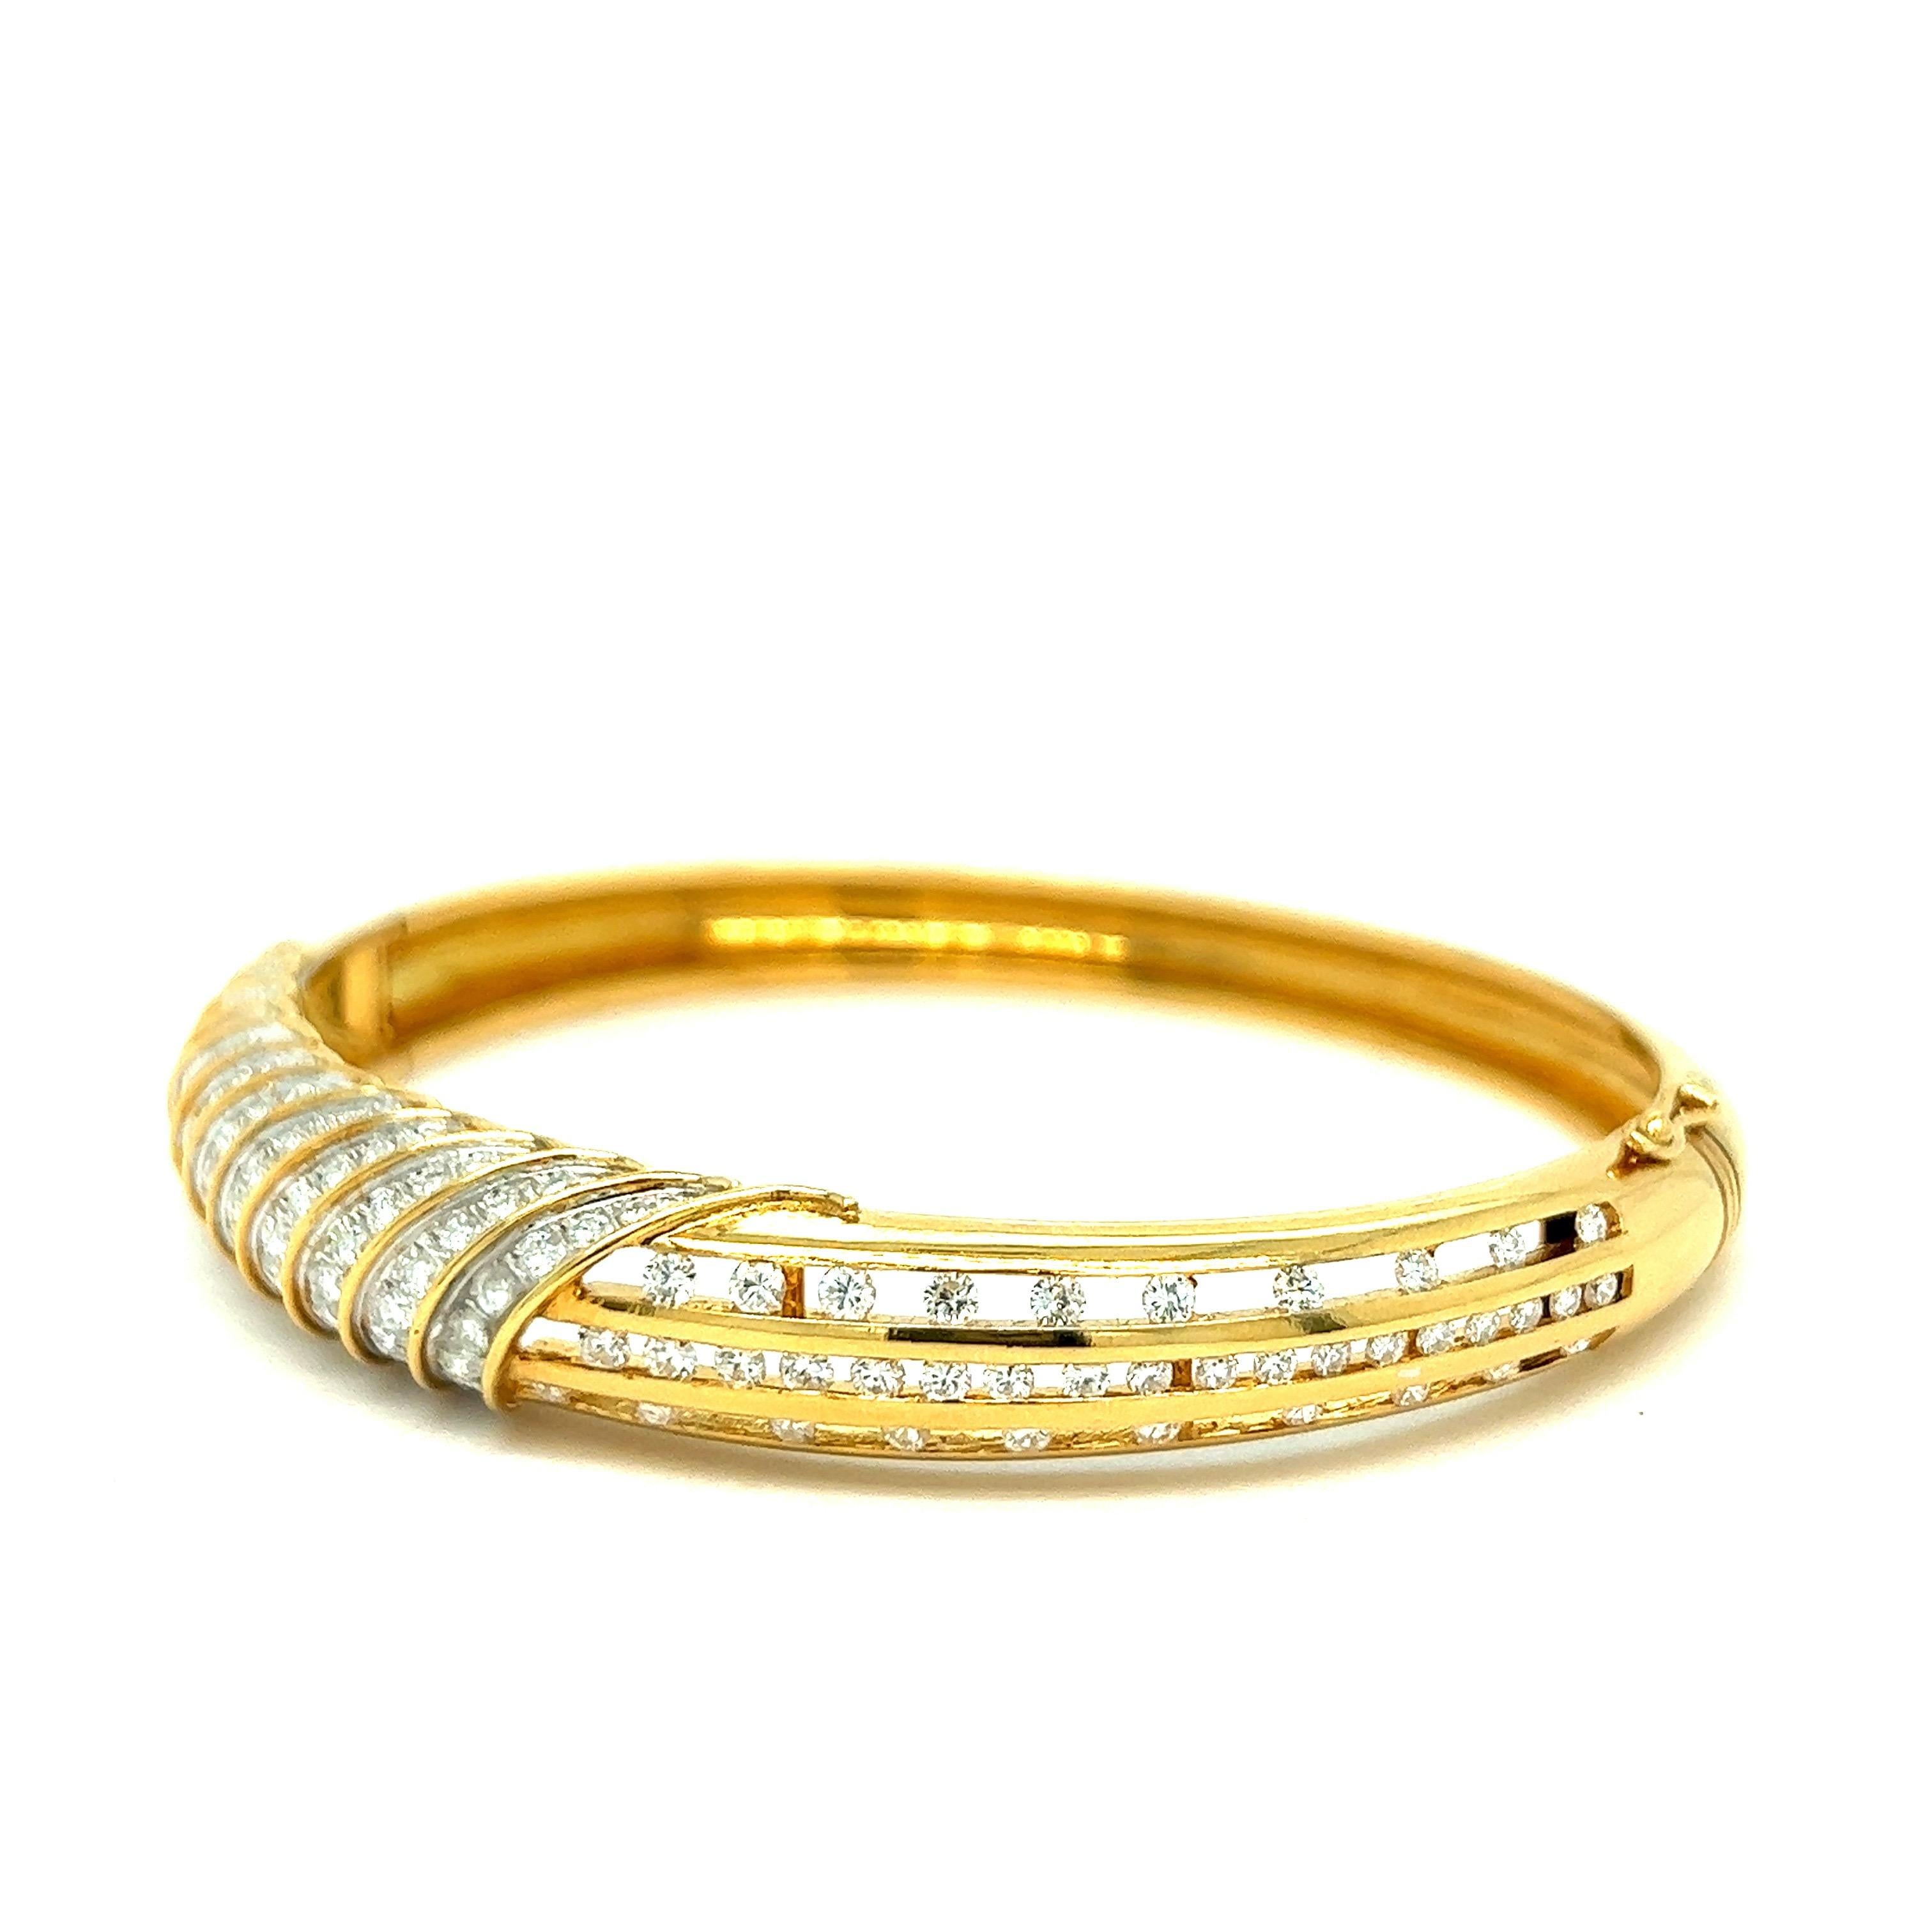 Diamond yellow gold bangle bracelet, made in Italy

Very clean and white round-cut diamonds of approximately 4.5 carats, 18 karat yellow gold; marked 750, 18k

Size: thickness 1 cm; inner diameters 5.5 and 5 cm; inner circumference 6.5 inches
Total